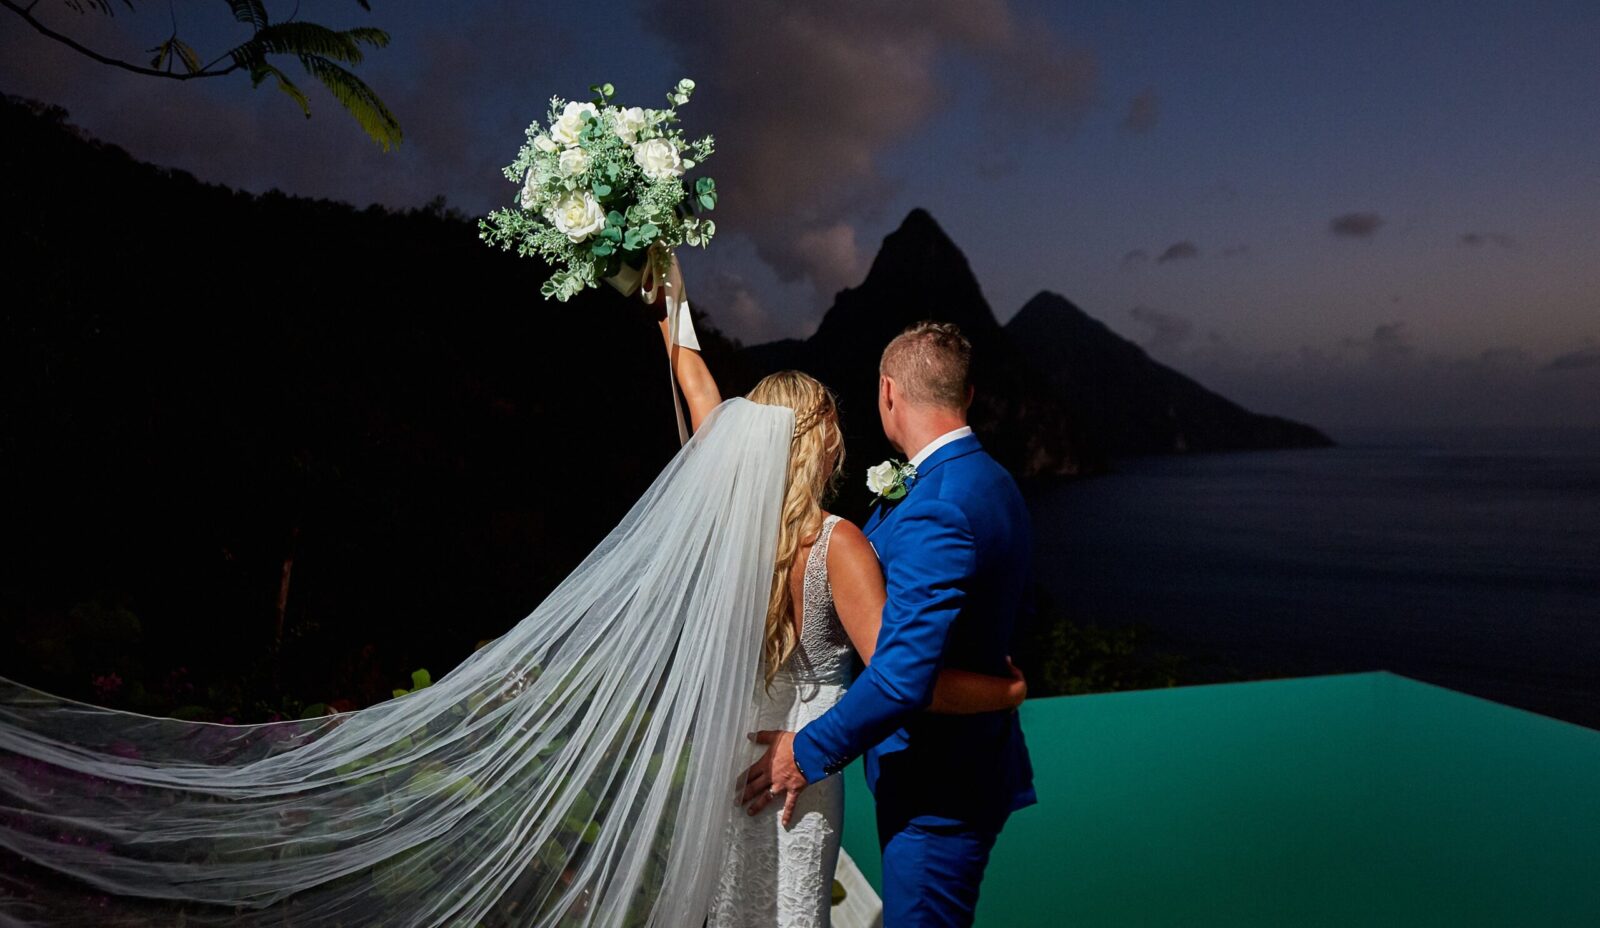 A newly wed couple face away from the camera as the bride prepares to throuw her bouquet. They stand infront of a turquoise pool and the pitons mountains in the distance